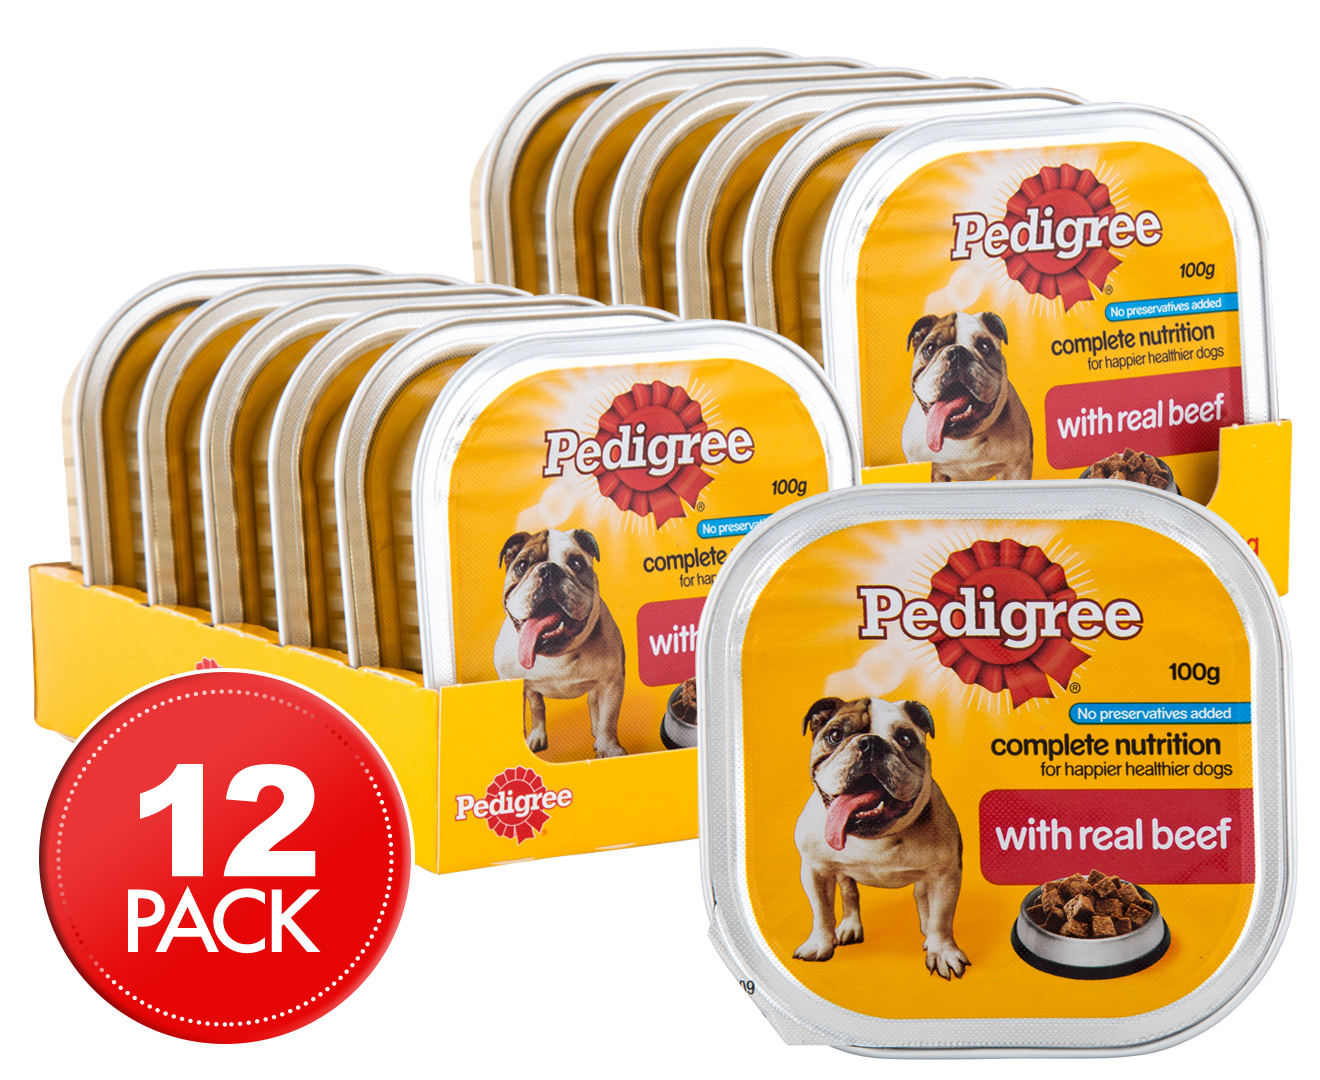 12 x Pedigree Complete Nutrition w/ Real Beef 100g